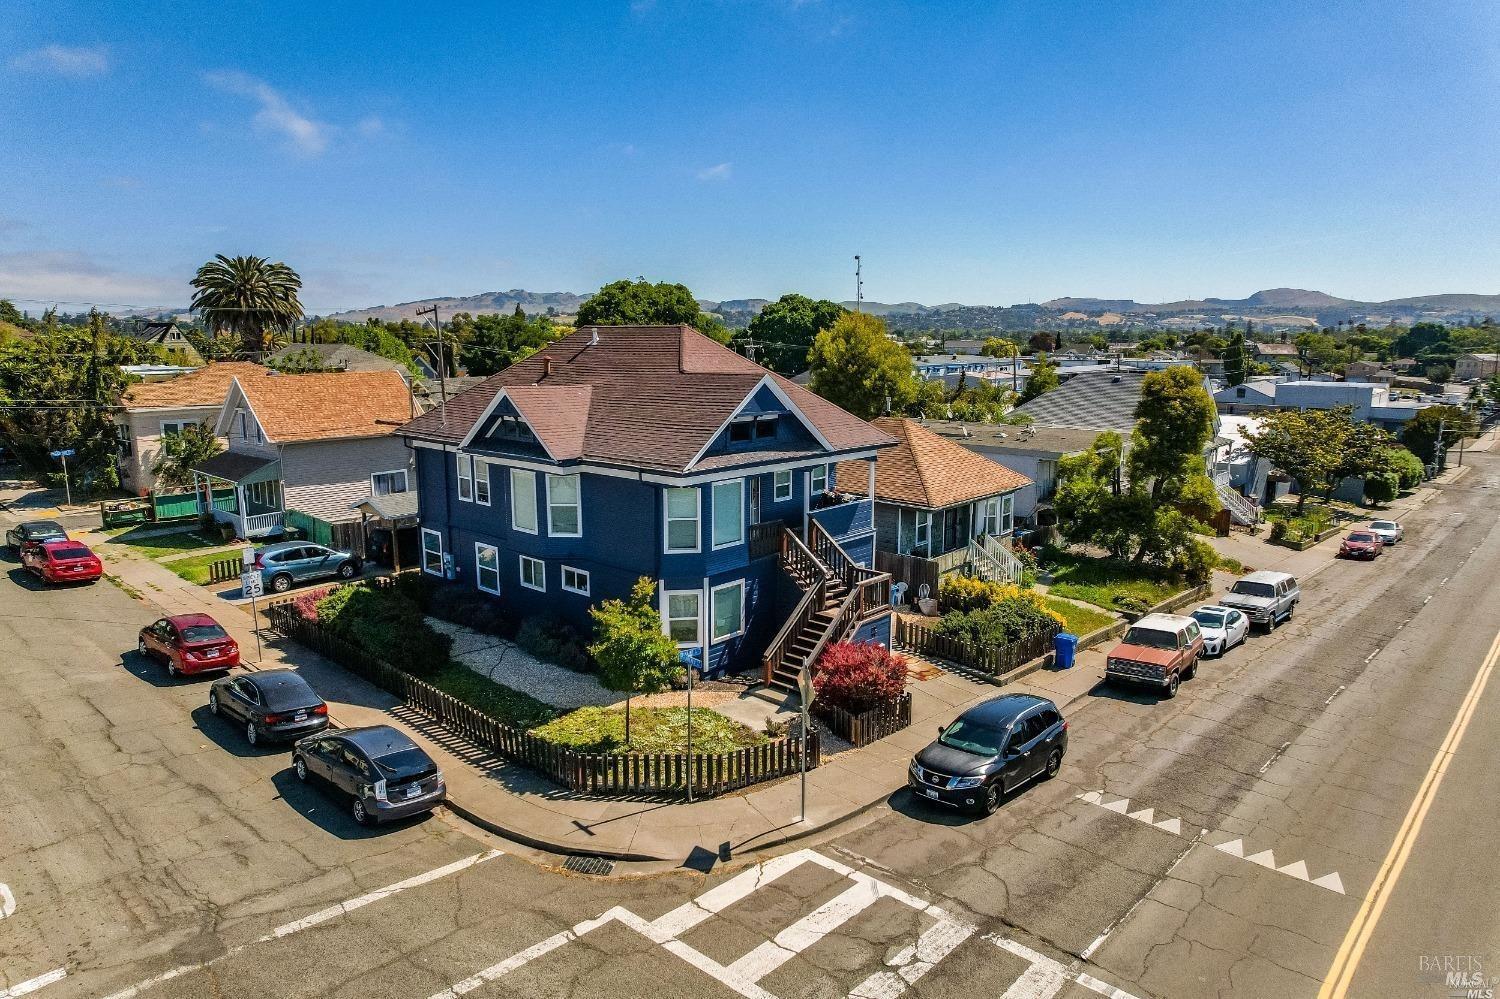 Photo of 902904 Maine St in Vallejo, CA